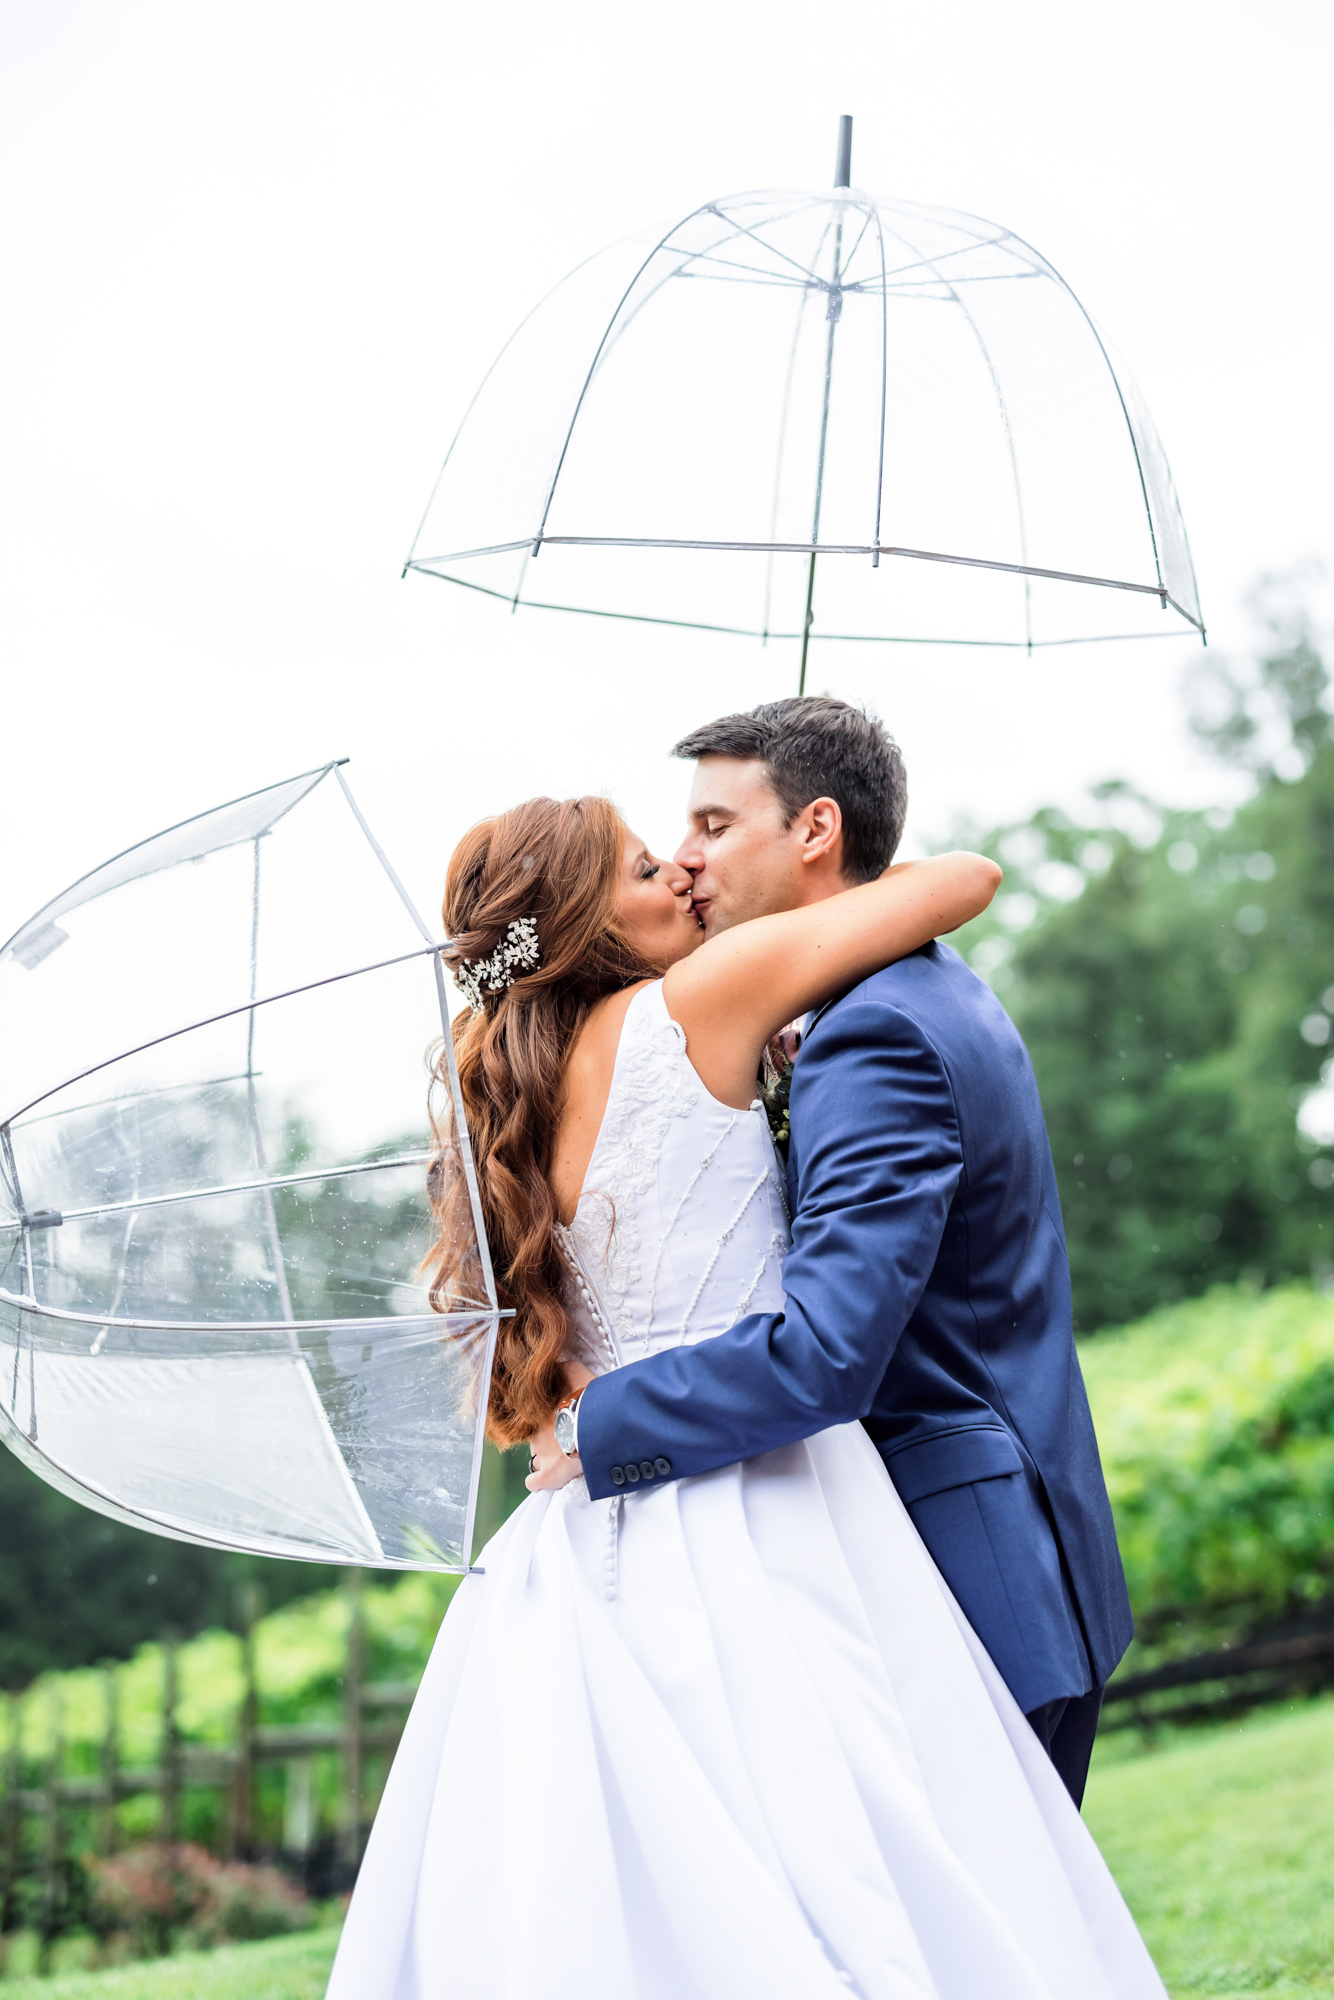 wedding couple embracing while holding clear umbrellas during rainy first look